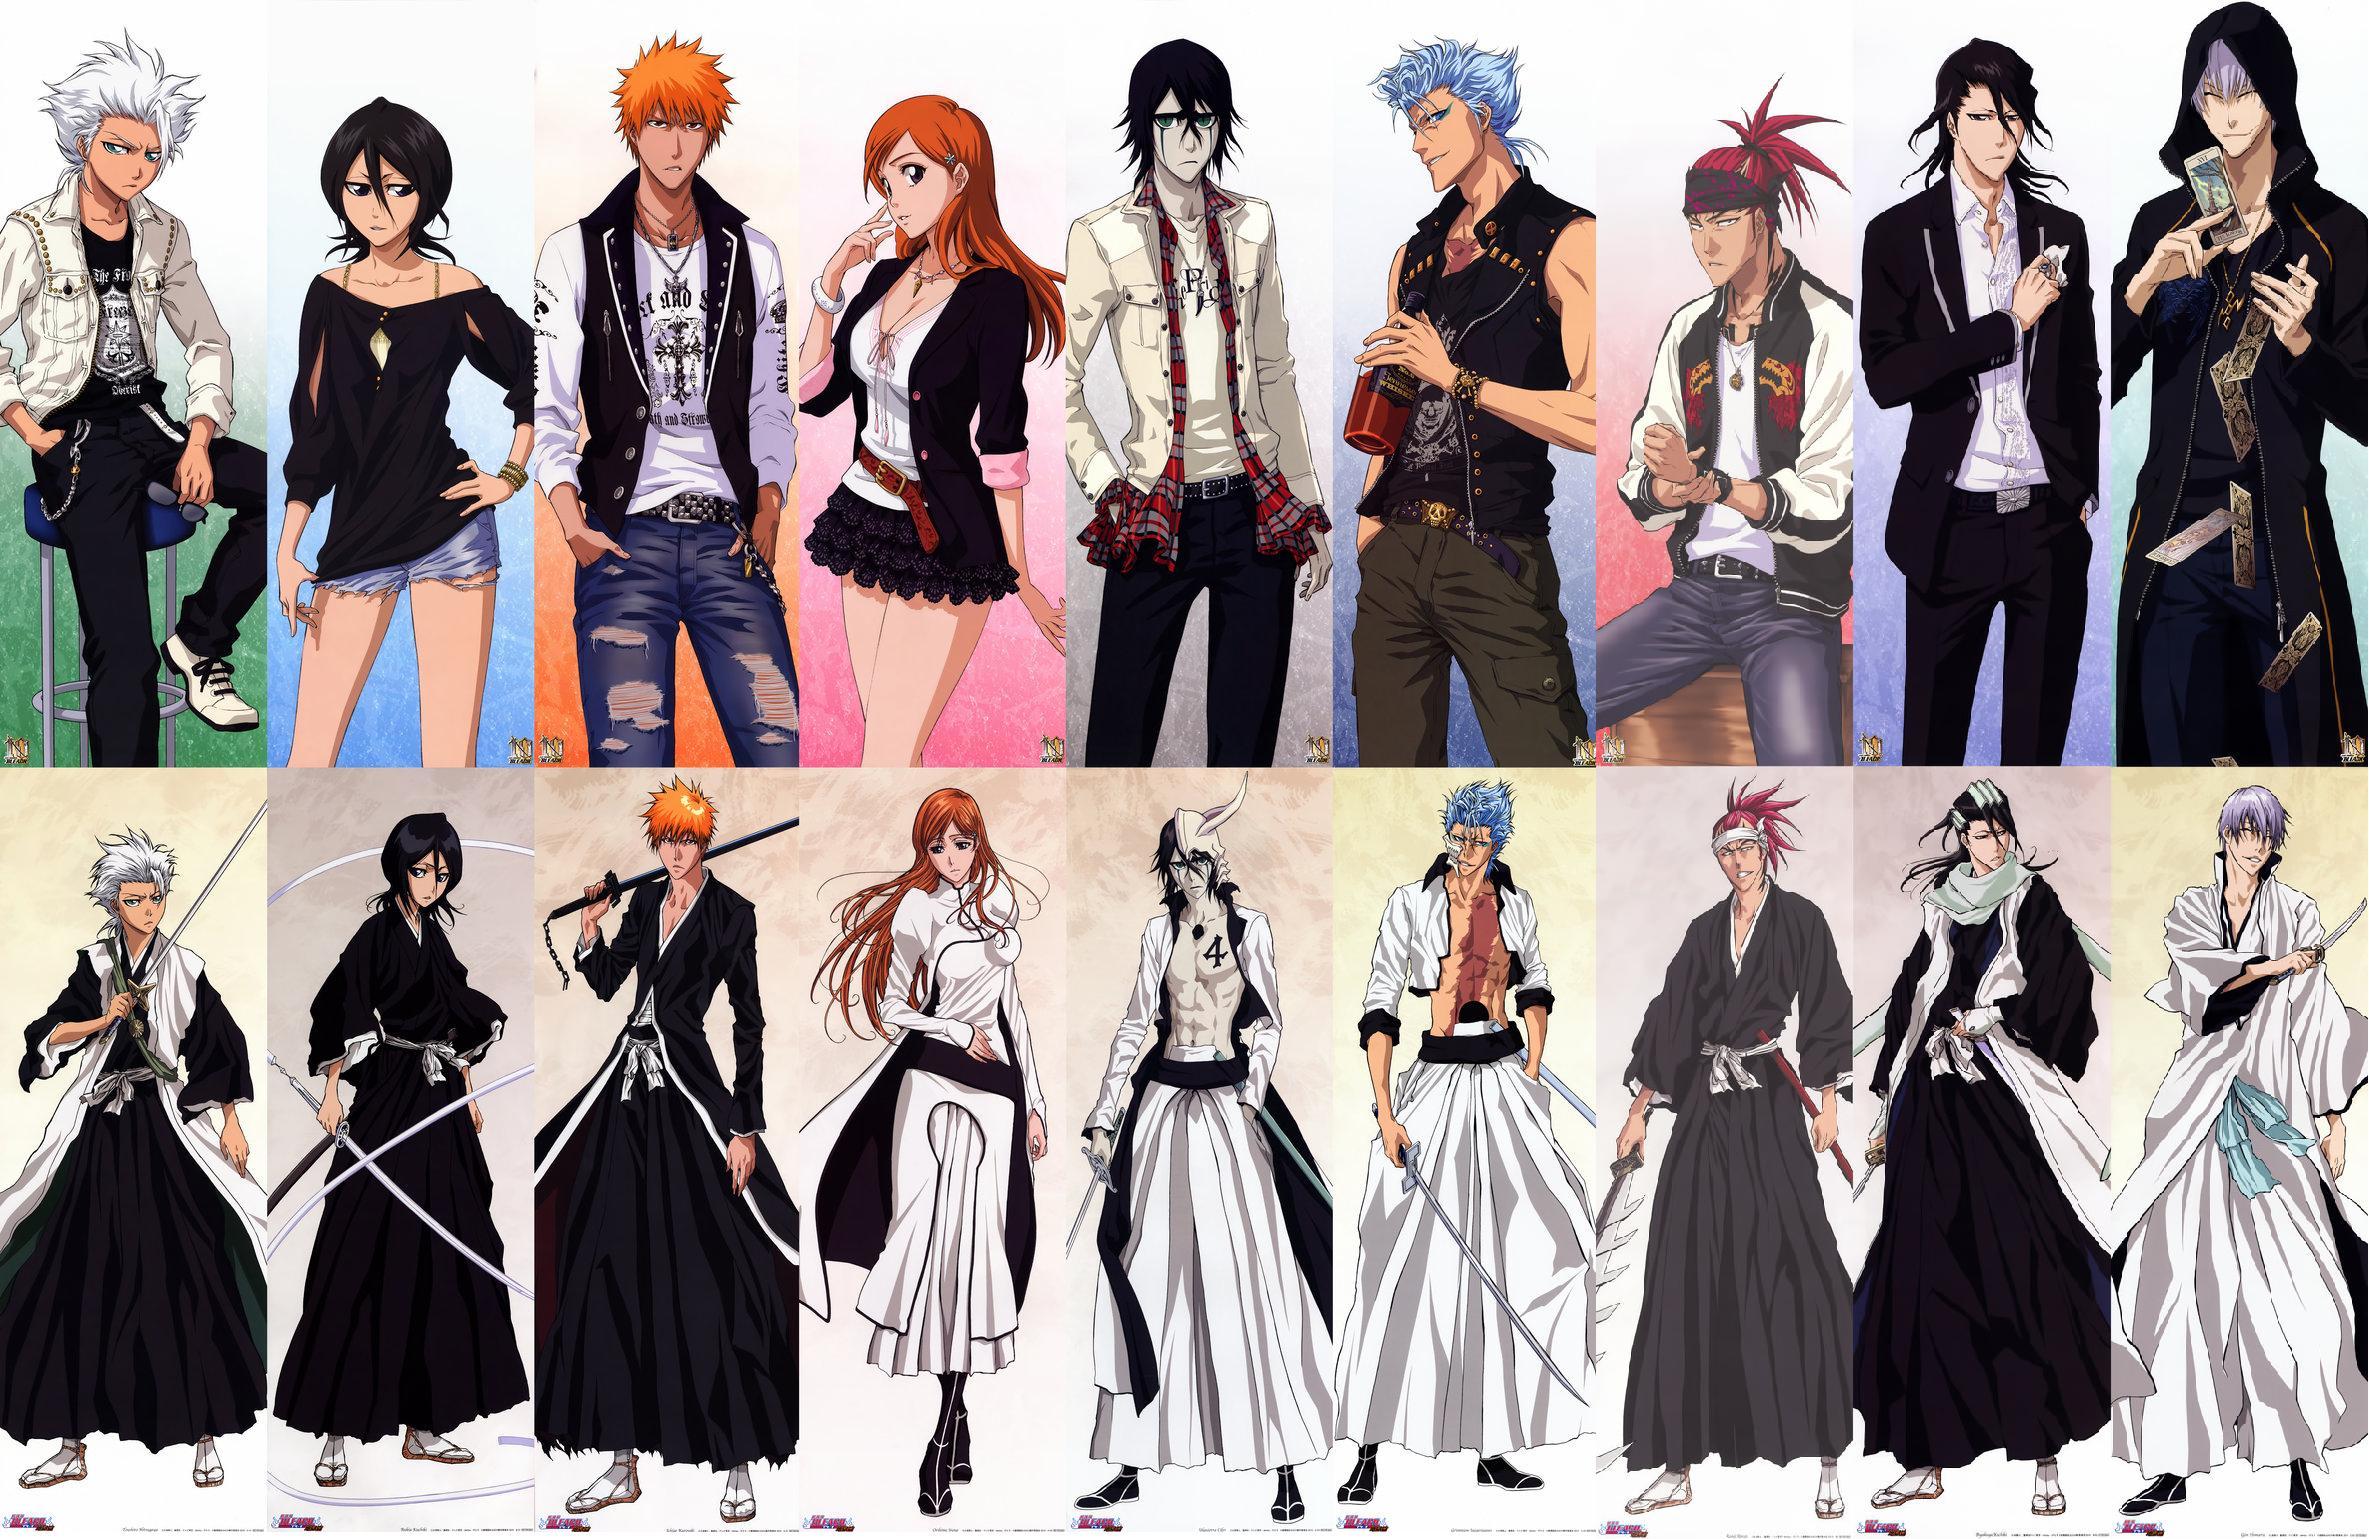 Free download Bleach Anime TV Series Desktop Backgrounds for Free HD